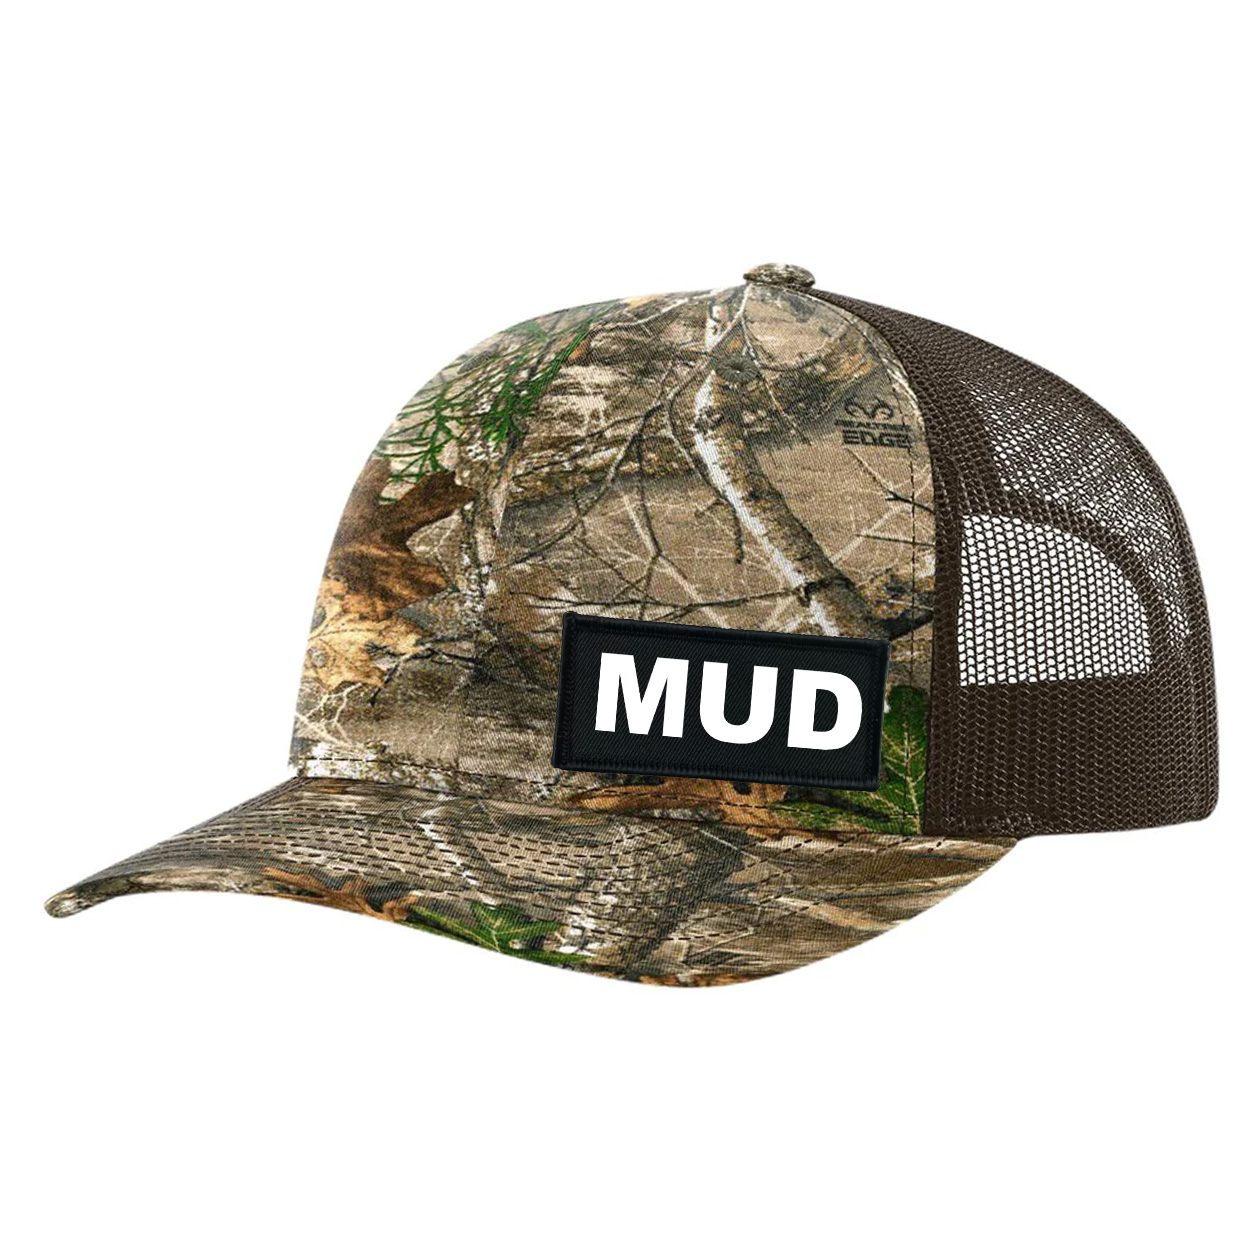 Mud Brand Logo Night Out Woven Patch Snapback Trucker Hat Realtree Edge/ Brown